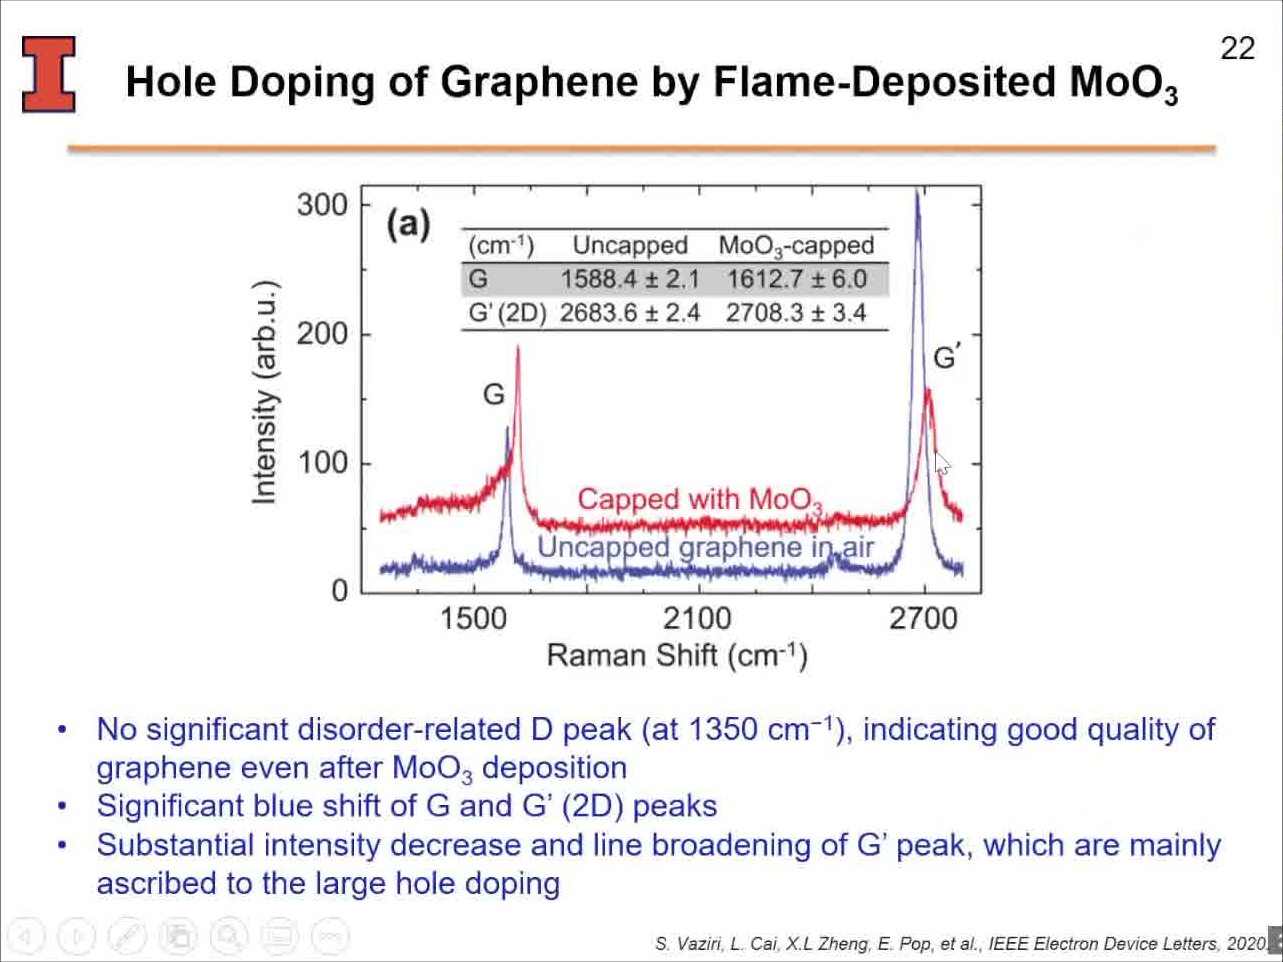 Hole Doping of Graphene by Flame-Deposited MoO3